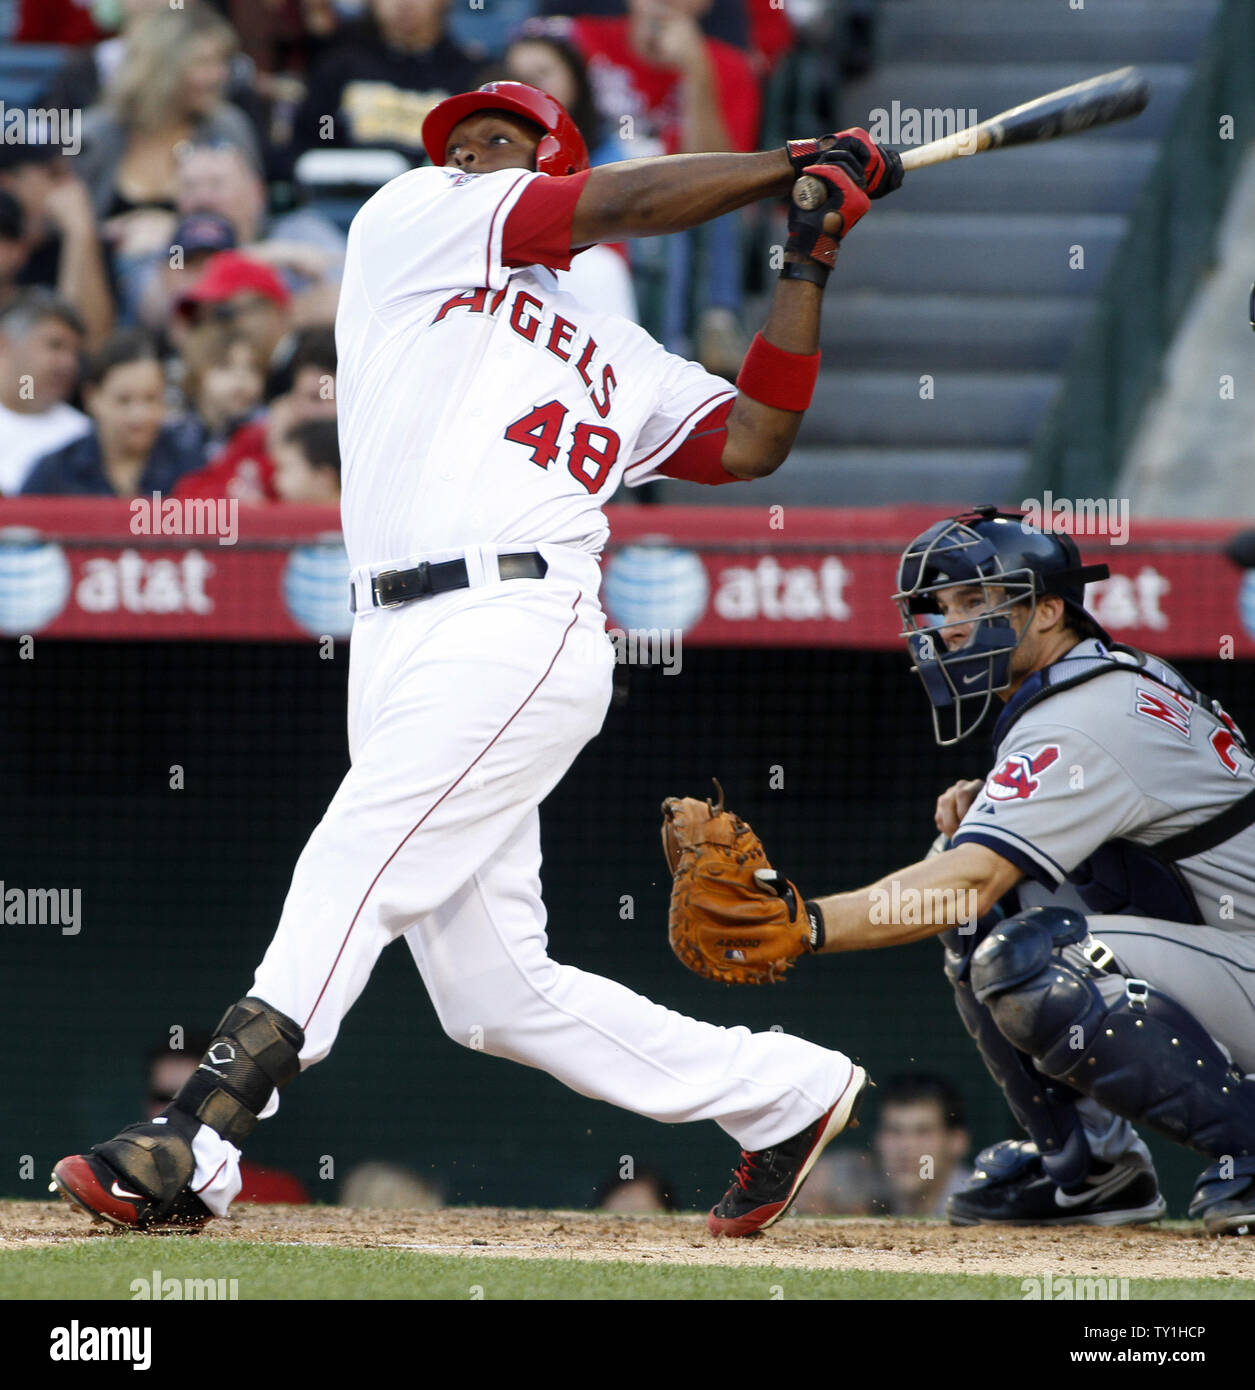 Los Angeles Angels center fielder Torii Hunter hits a 3 run home run in the sixth inning as Cleveland Indians catcher Lou Marson catches at Angel Stadium in Anaheim, California on April 28, 2010.    UPI/Lori Shepler. Stock Photo